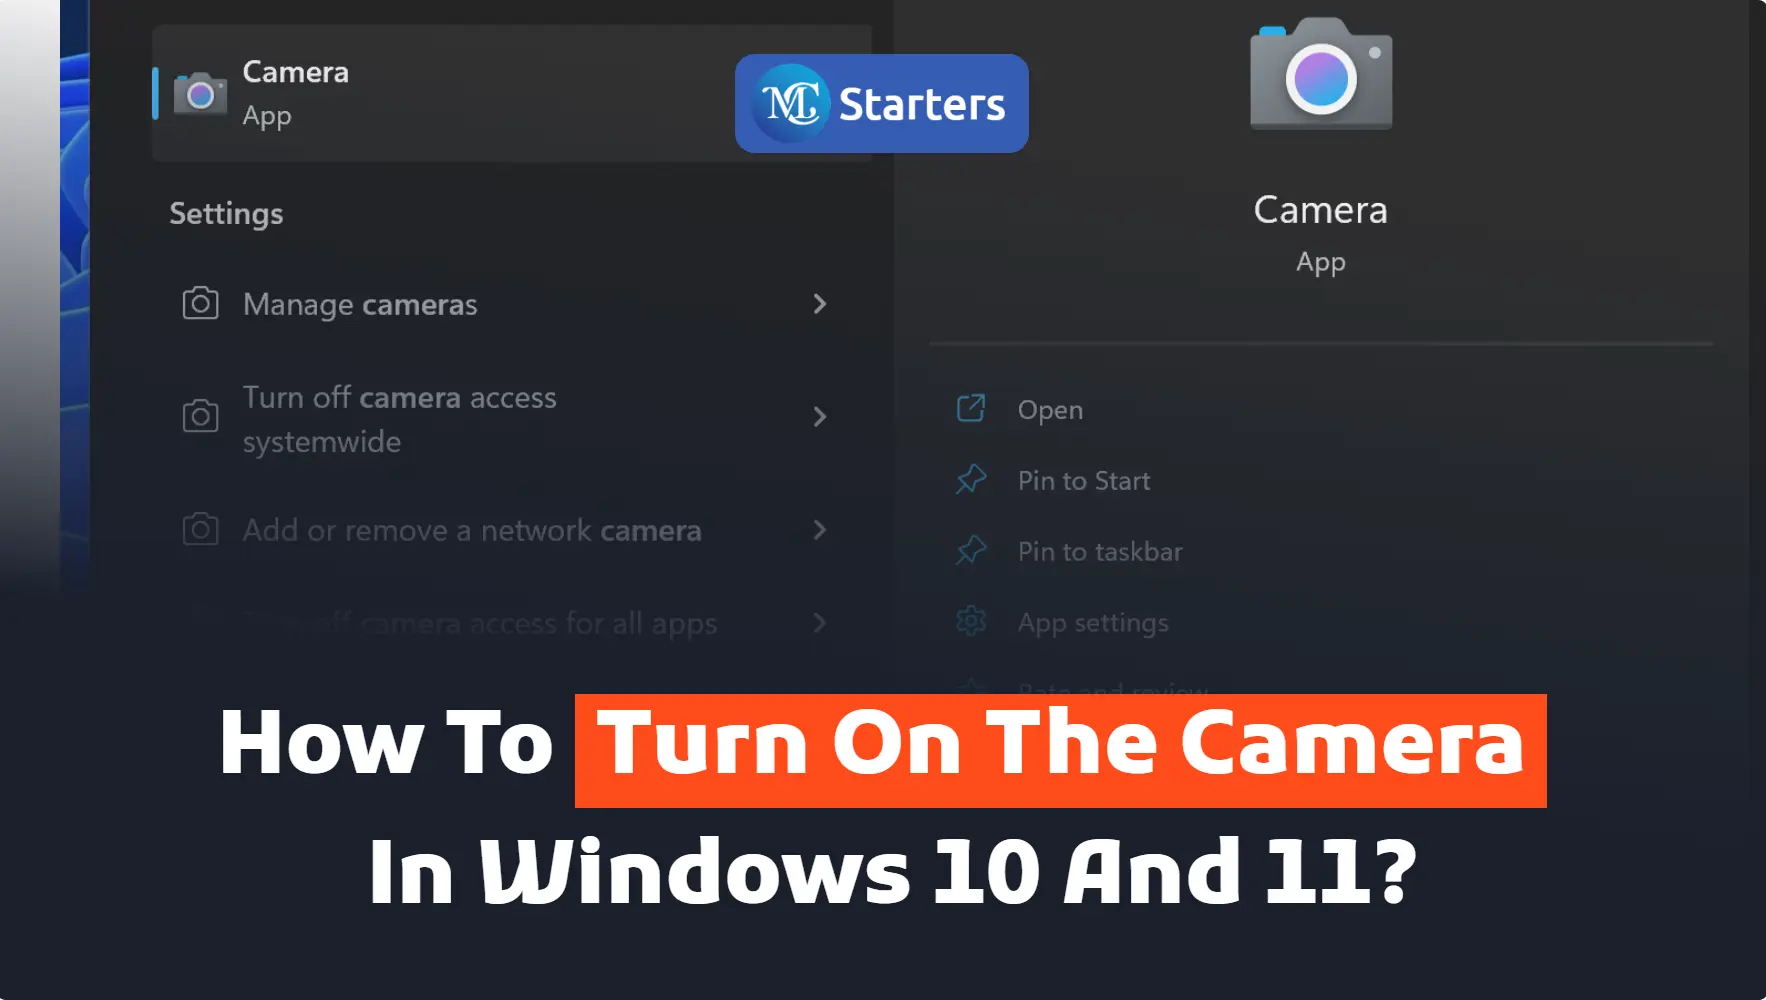 How to turn on the Camera in Windows 10 and 11?